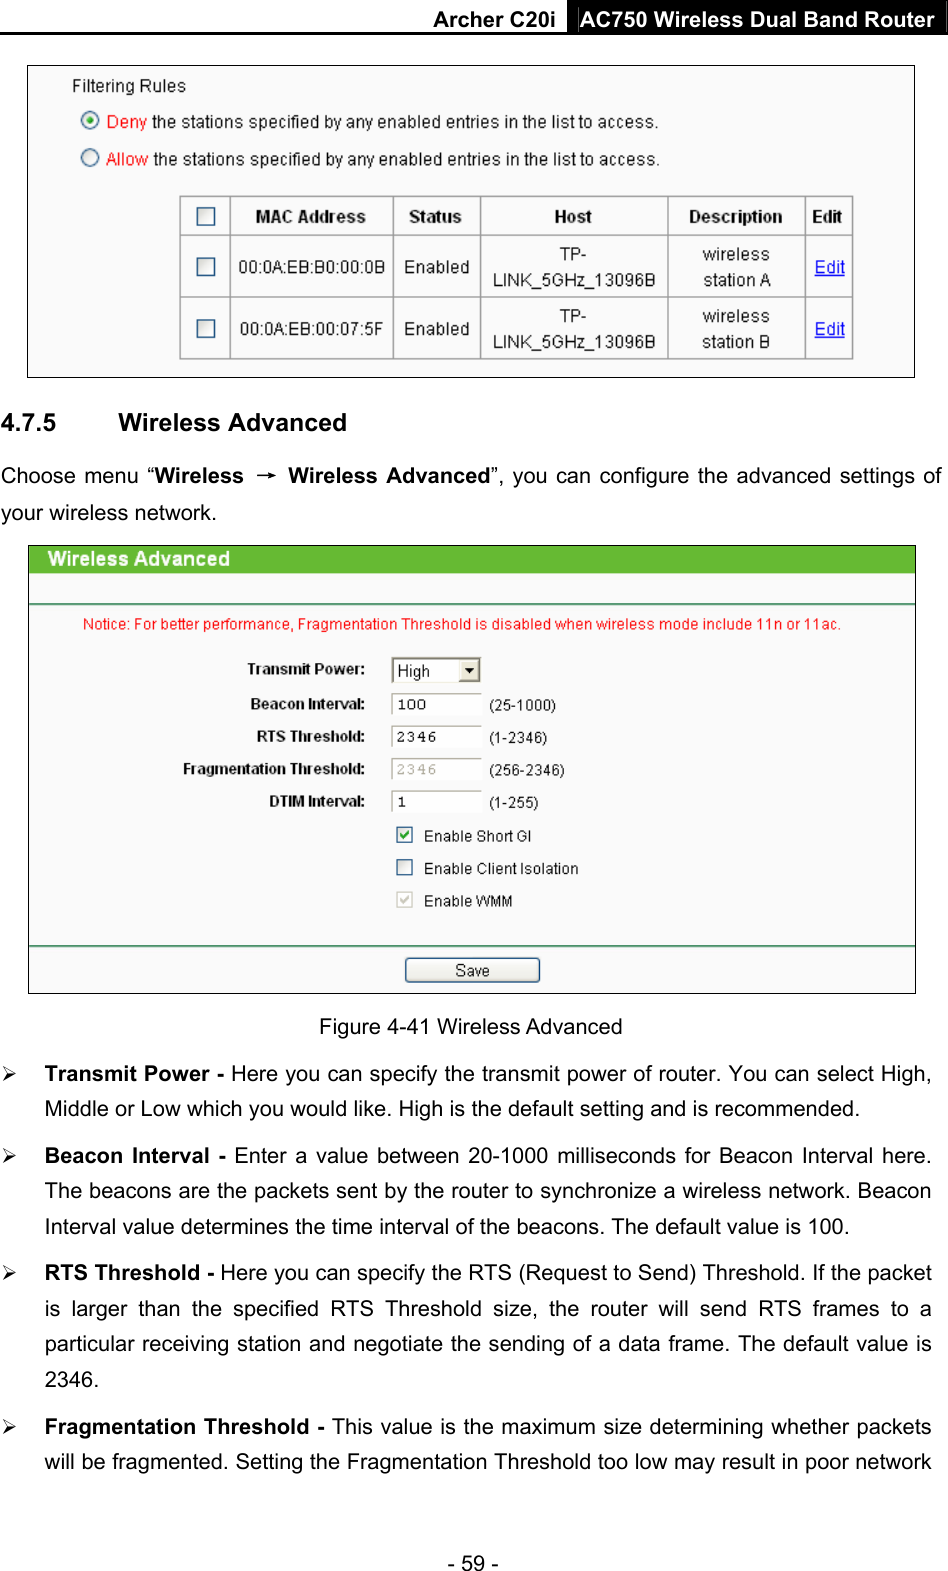 Archer C20i AC750 Wireless Dual Band Router - 59 -  4.7.5  Wireless Advanced Choose menu “Wireless  → Wireless Advanced”, you can configure the advanced settings of your wireless network.  Figure 4-41 Wireless Advanced ¾ Transmit Power - Here you can specify the transmit power of router. You can select High, Middle or Low which you would like. High is the default setting and is recommended. ¾ Beacon Interval - Enter a value between 20-1000 milliseconds for Beacon Interval here. The beacons are the packets sent by the router to synchronize a wireless network. Beacon Interval value determines the time interval of the beacons. The default value is 100.   ¾ RTS Threshold - Here you can specify the RTS (Request to Send) Threshold. If the packet is larger than the specified RTS Threshold size, the router will send RTS frames to a particular receiving station and negotiate the sending of a data frame. The default value is 2346.  ¾ Fragmentation Threshold - This value is the maximum size determining whether packets will be fragmented. Setting the Fragmentation Threshold too low may result in poor network 